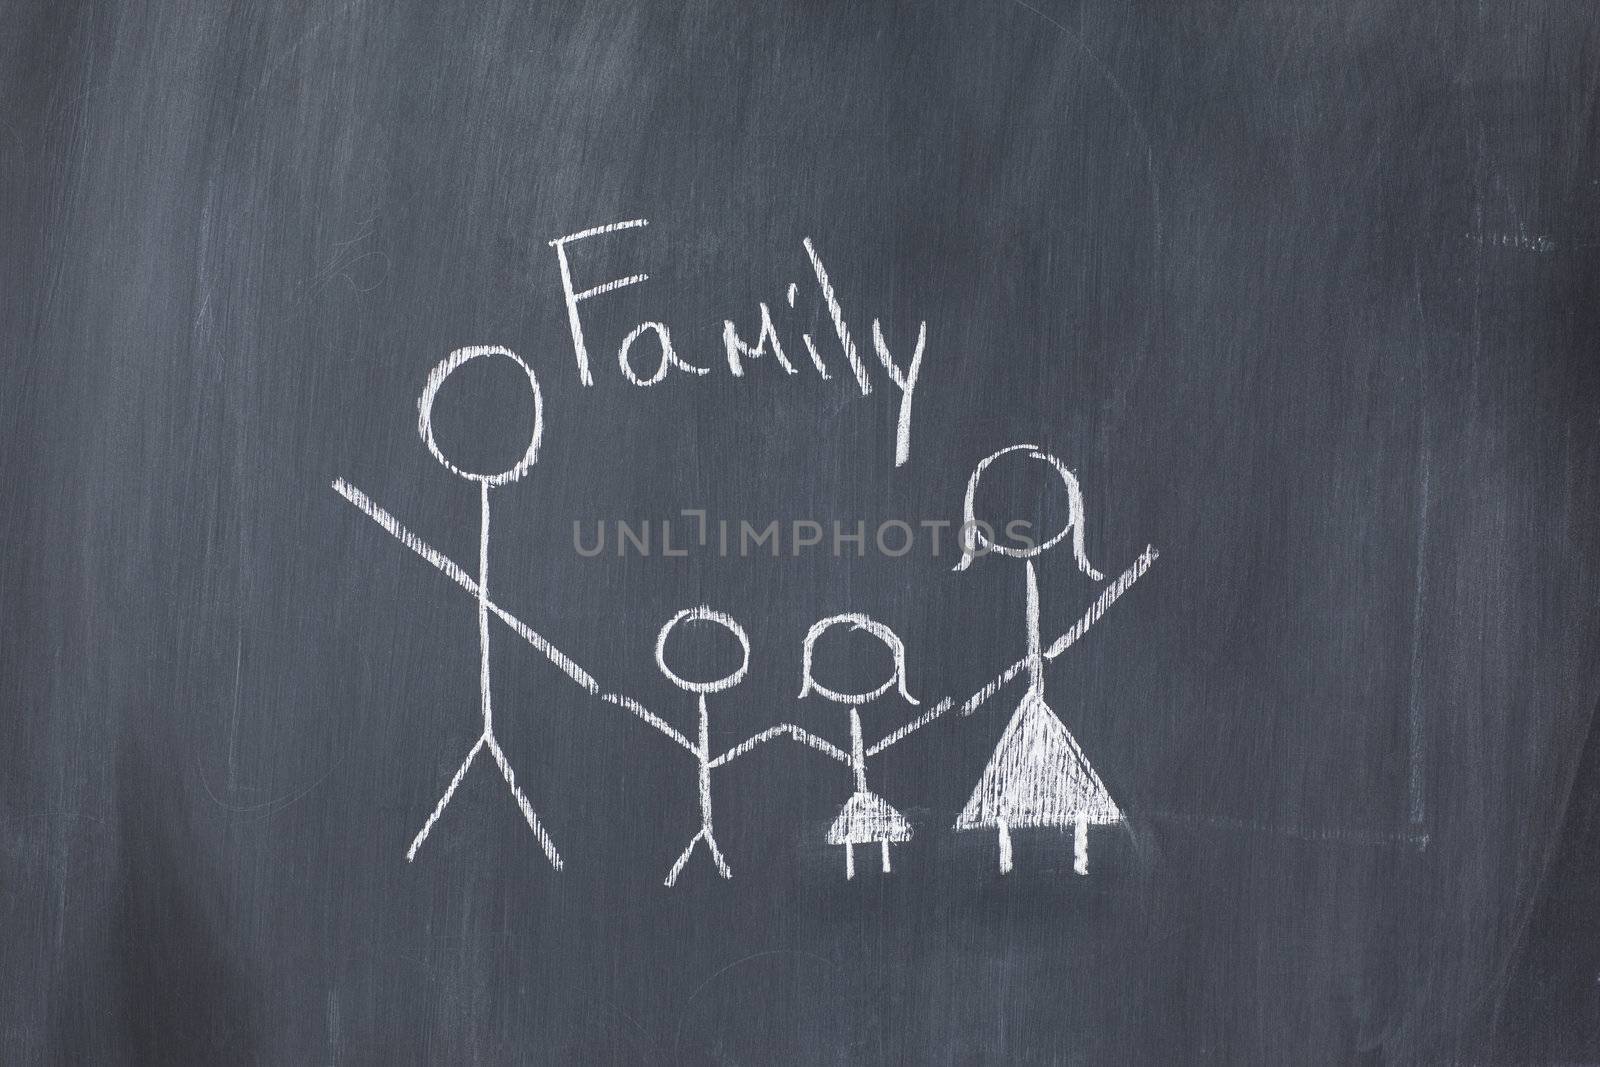 Drawing of a family on a blackboard